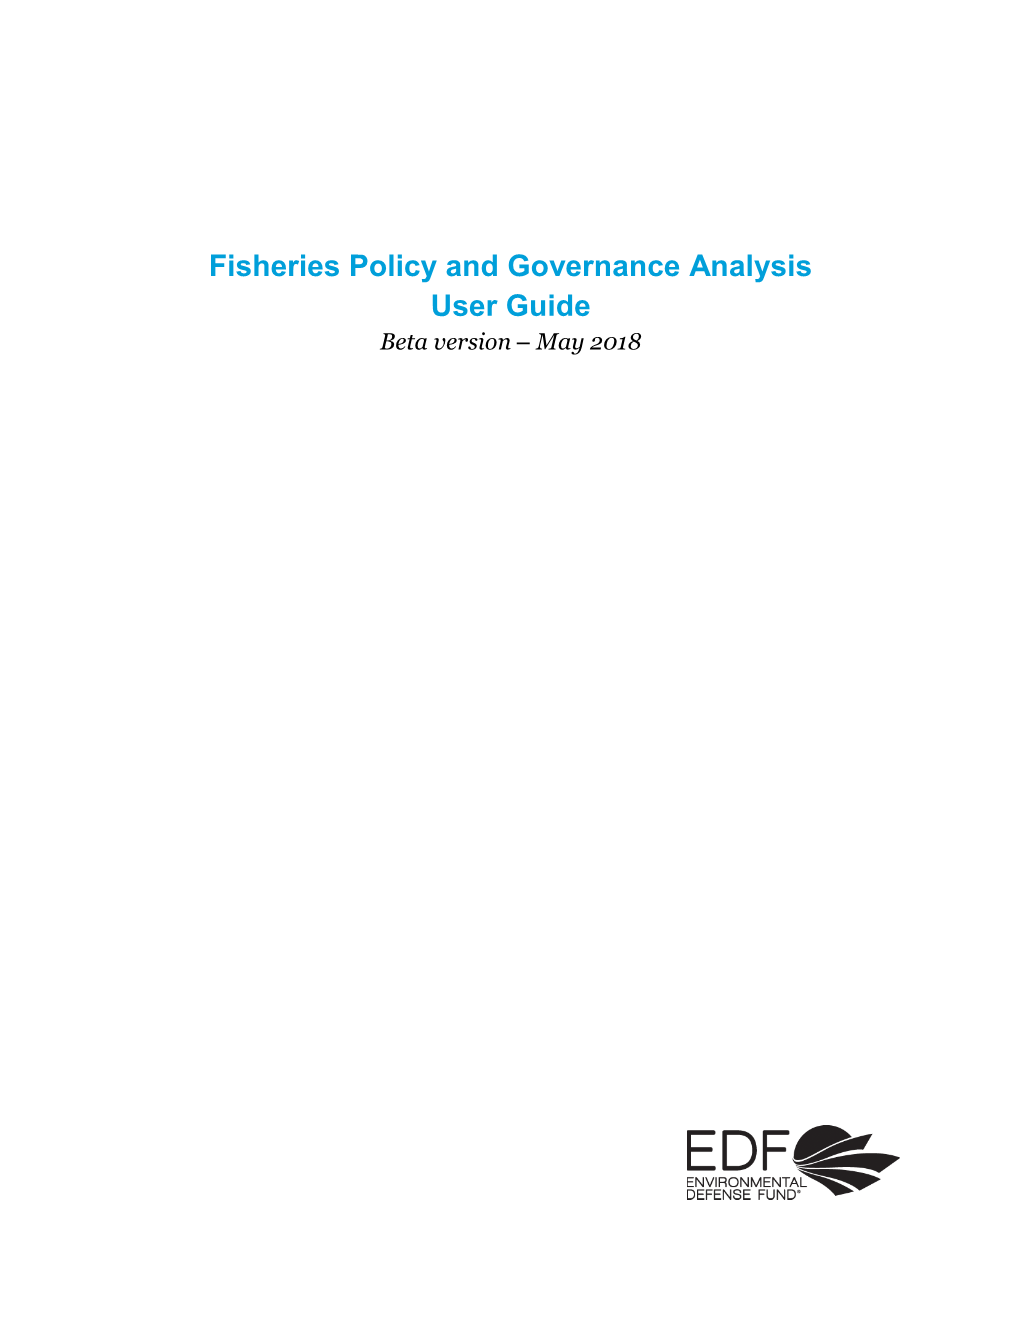 Fisheries Policy and Governance Analysis User Guide Beta Version – May 2018